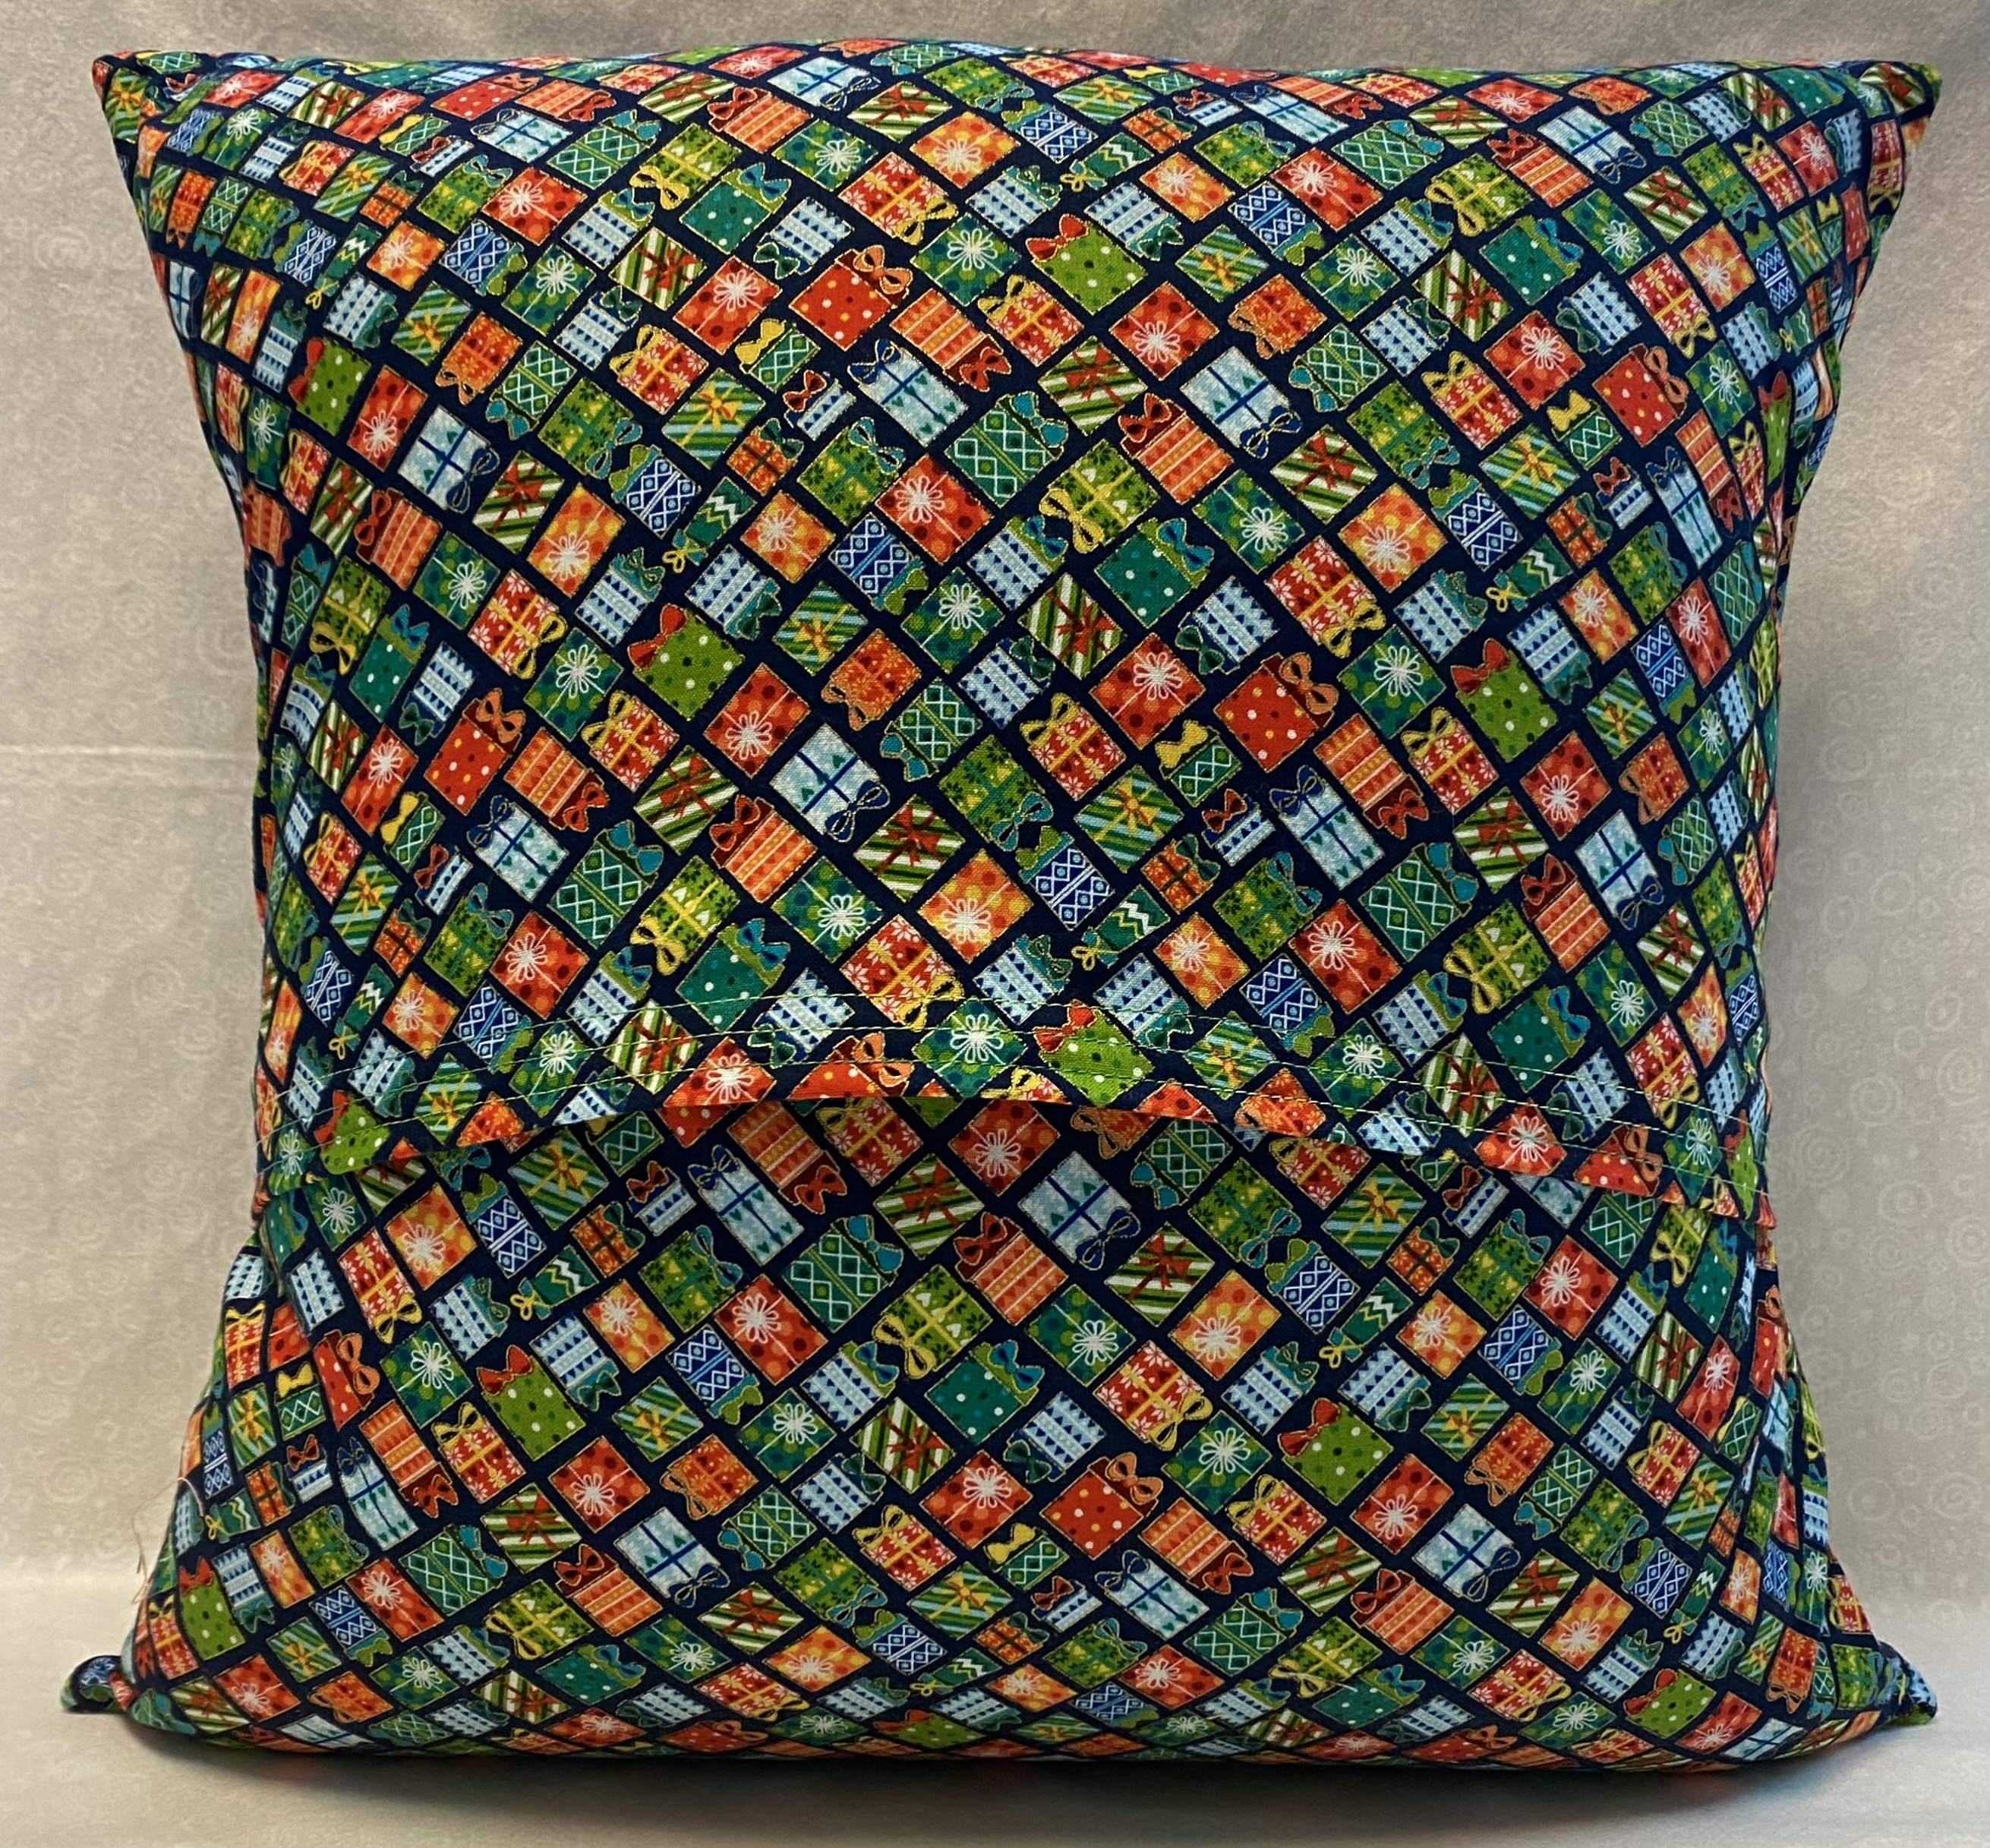 Present Pillow Cover - 18”